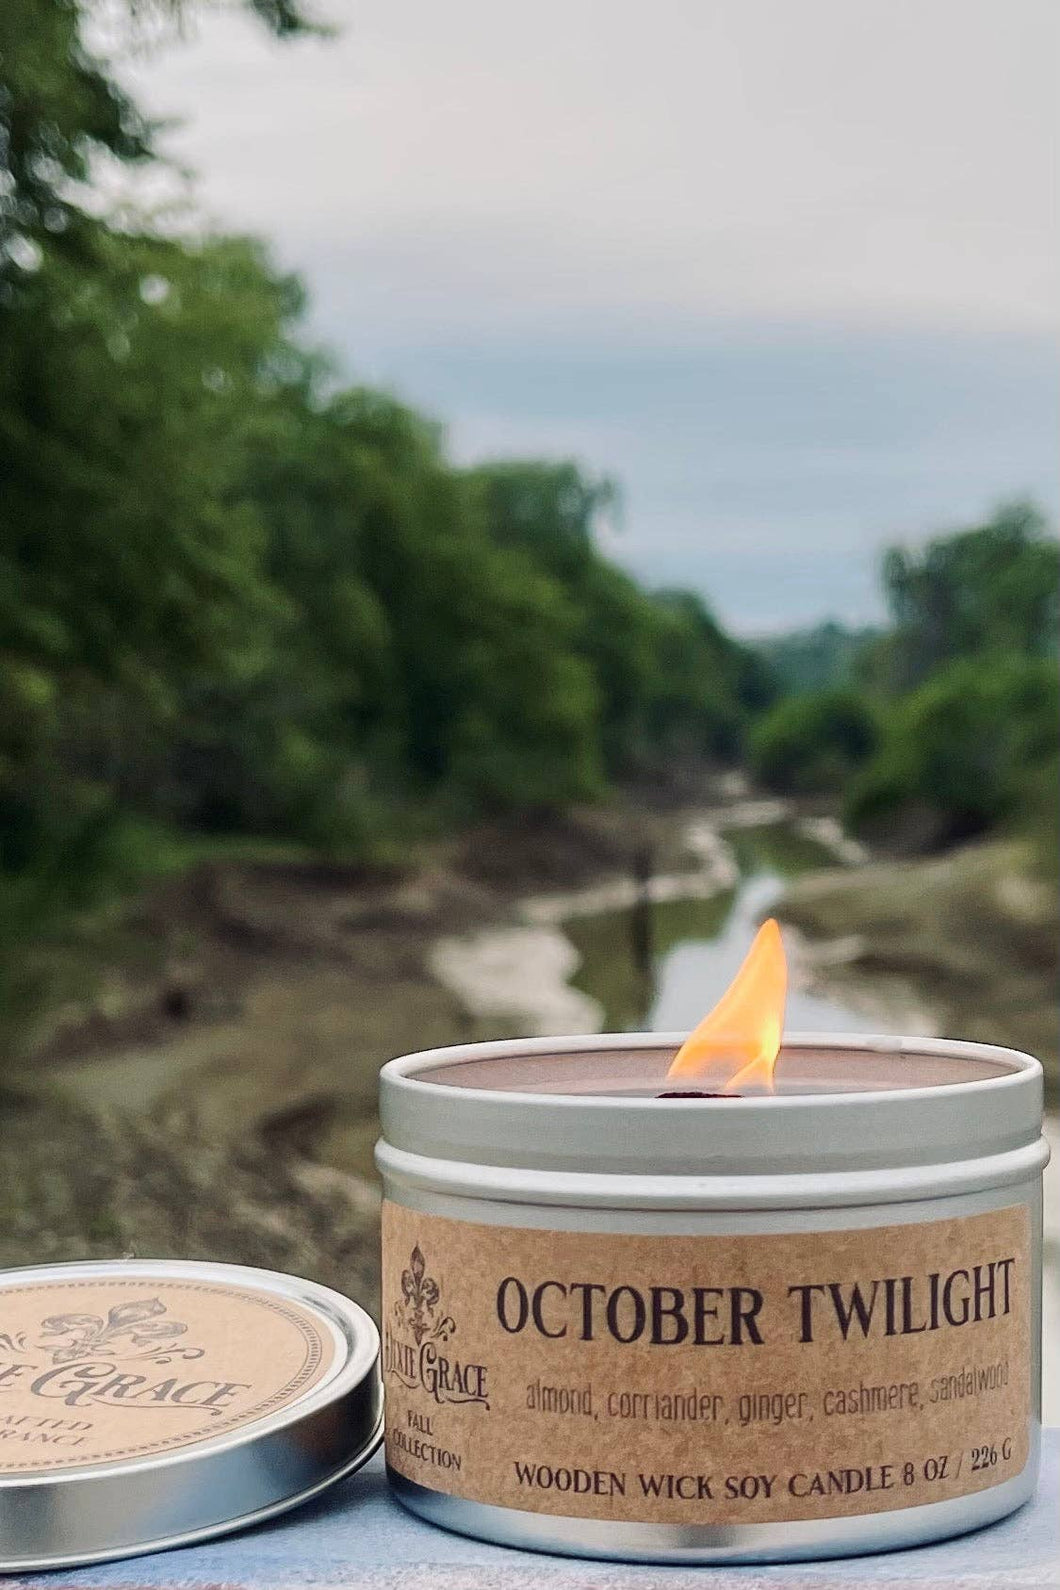 October Twilight - Wooden Wick Candle